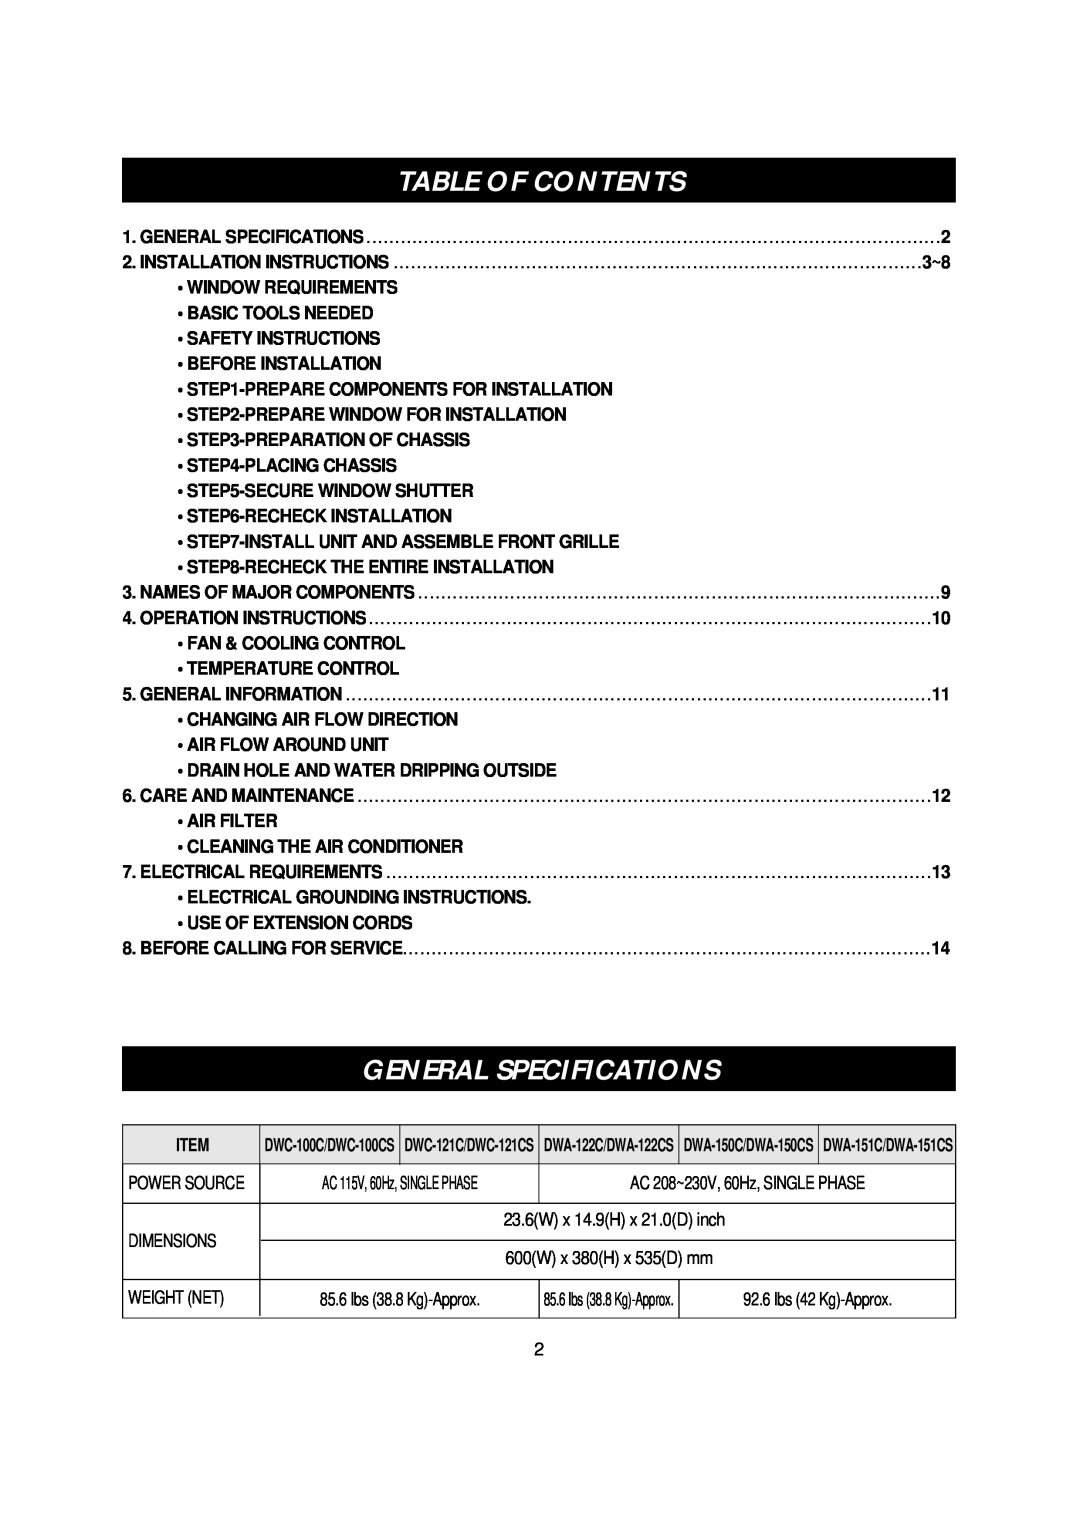 Daewoo DWC-100CS, DWC-121CS, DWA-150CS, DWA-122CS, DWA-151CS manual General Specifications, Table Of Contents 